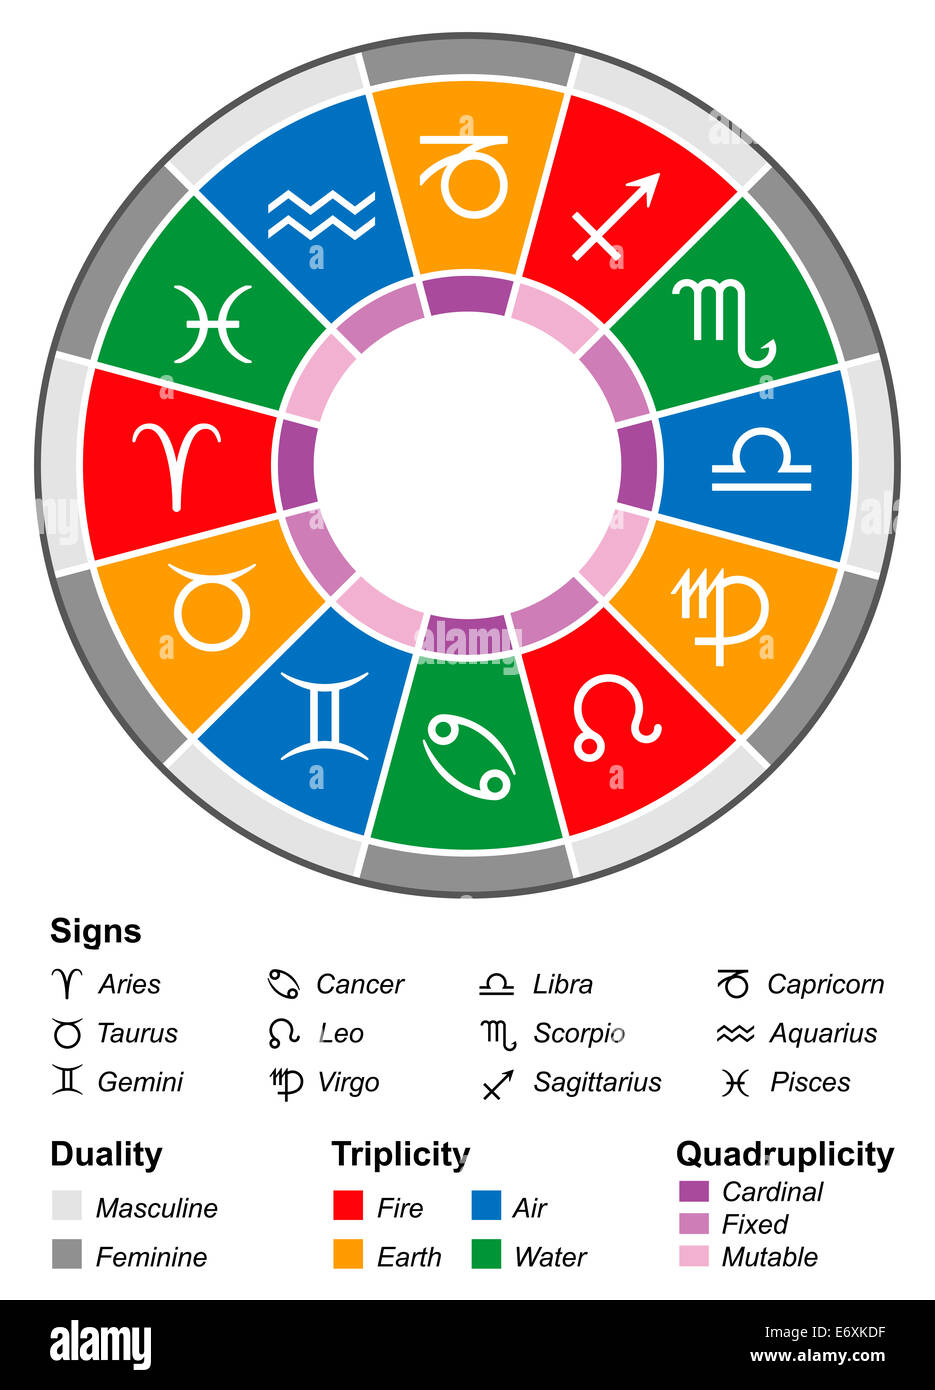 Astrology zodiac with twelve signs and the most important divisions, namely duality, triplicity, and quadruplicity. Stock Photo